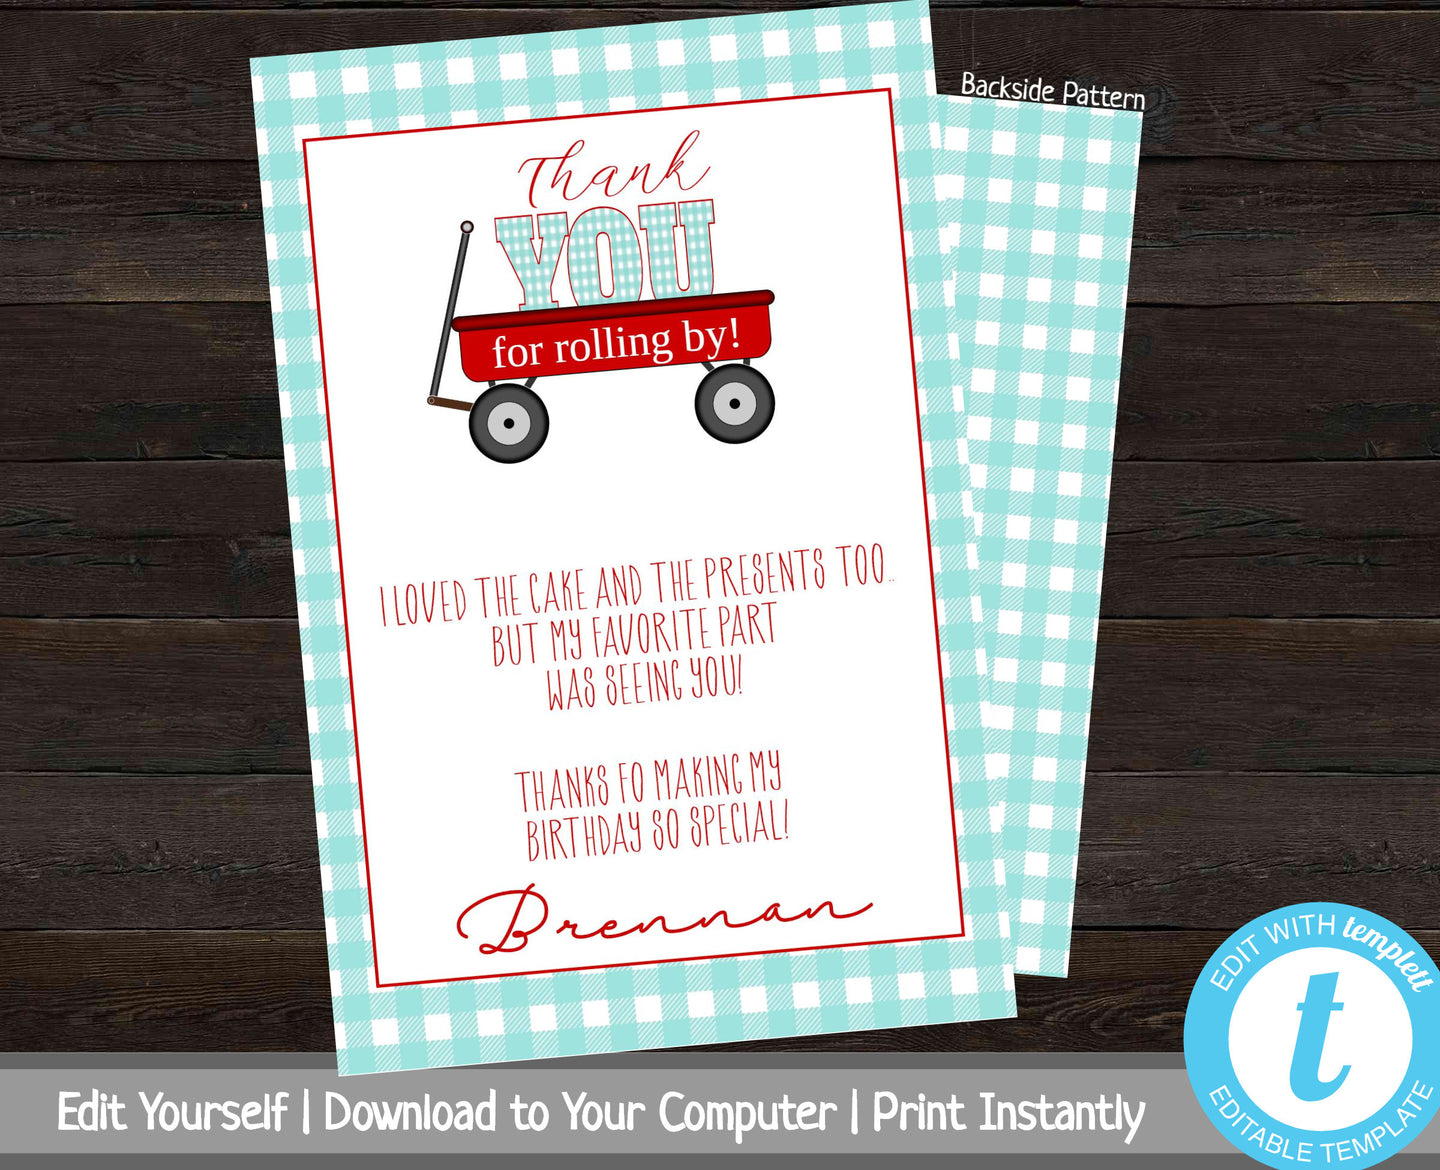 Thank You For Rolling By, Printable Birthday Thank You Card, First Birthday, Red Wagon Thank You Card, Teal Checkers, Customizable Thank You